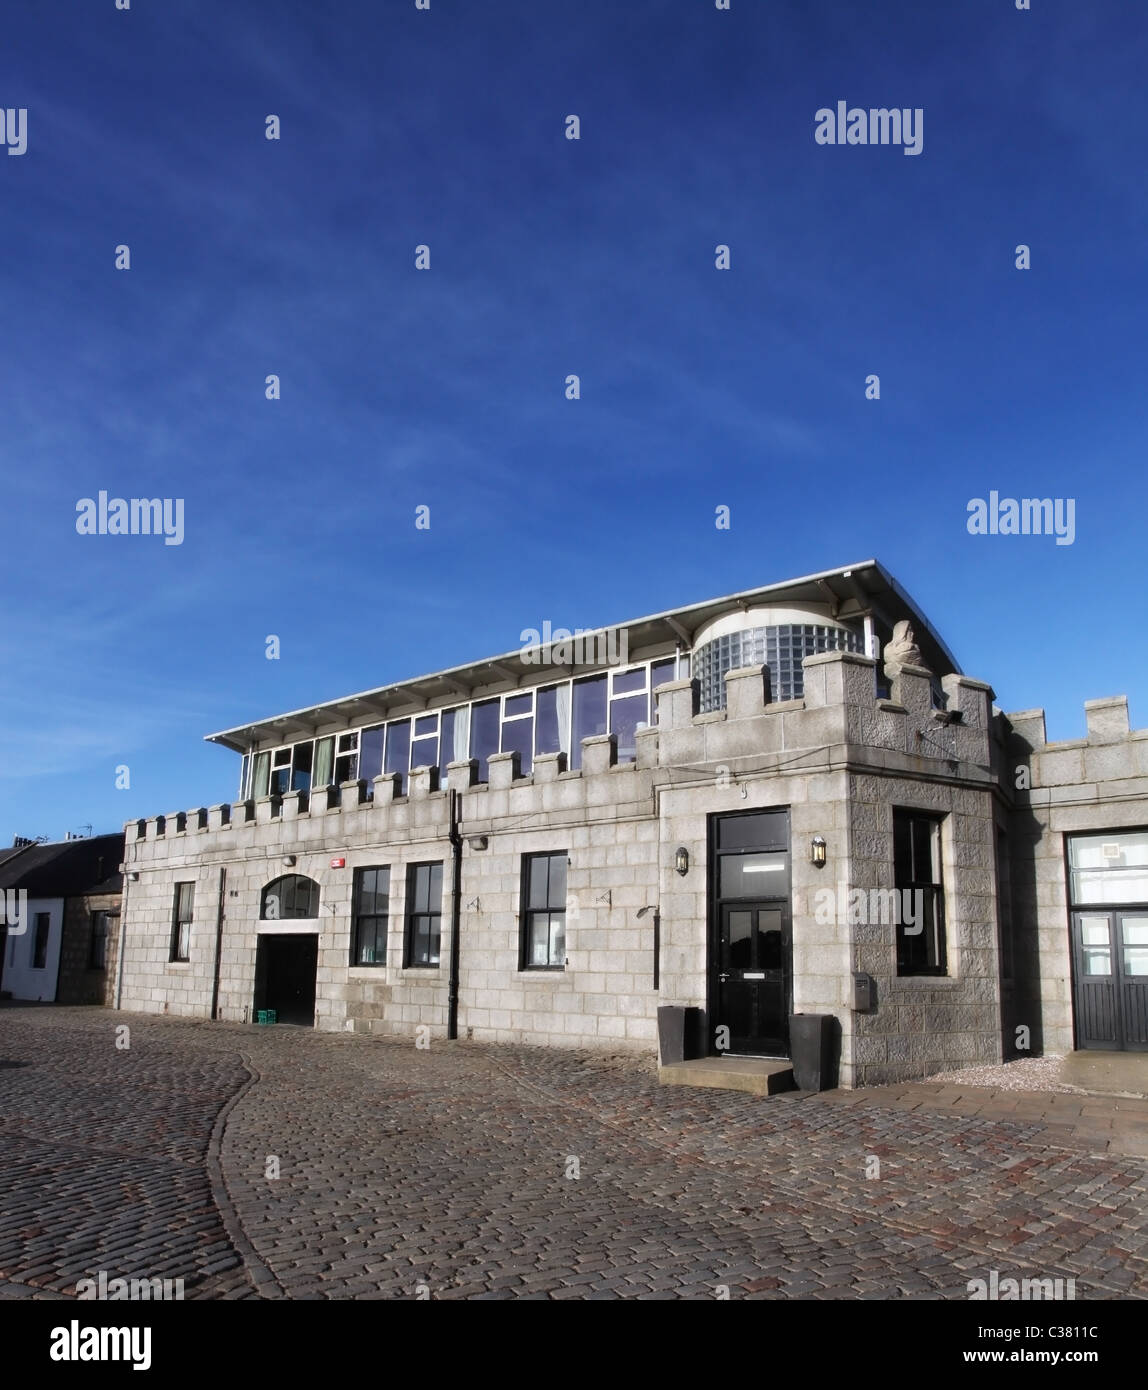 The Silver Darling seafood restaurant in Aberdeen, Scotland, UK Stock Photo